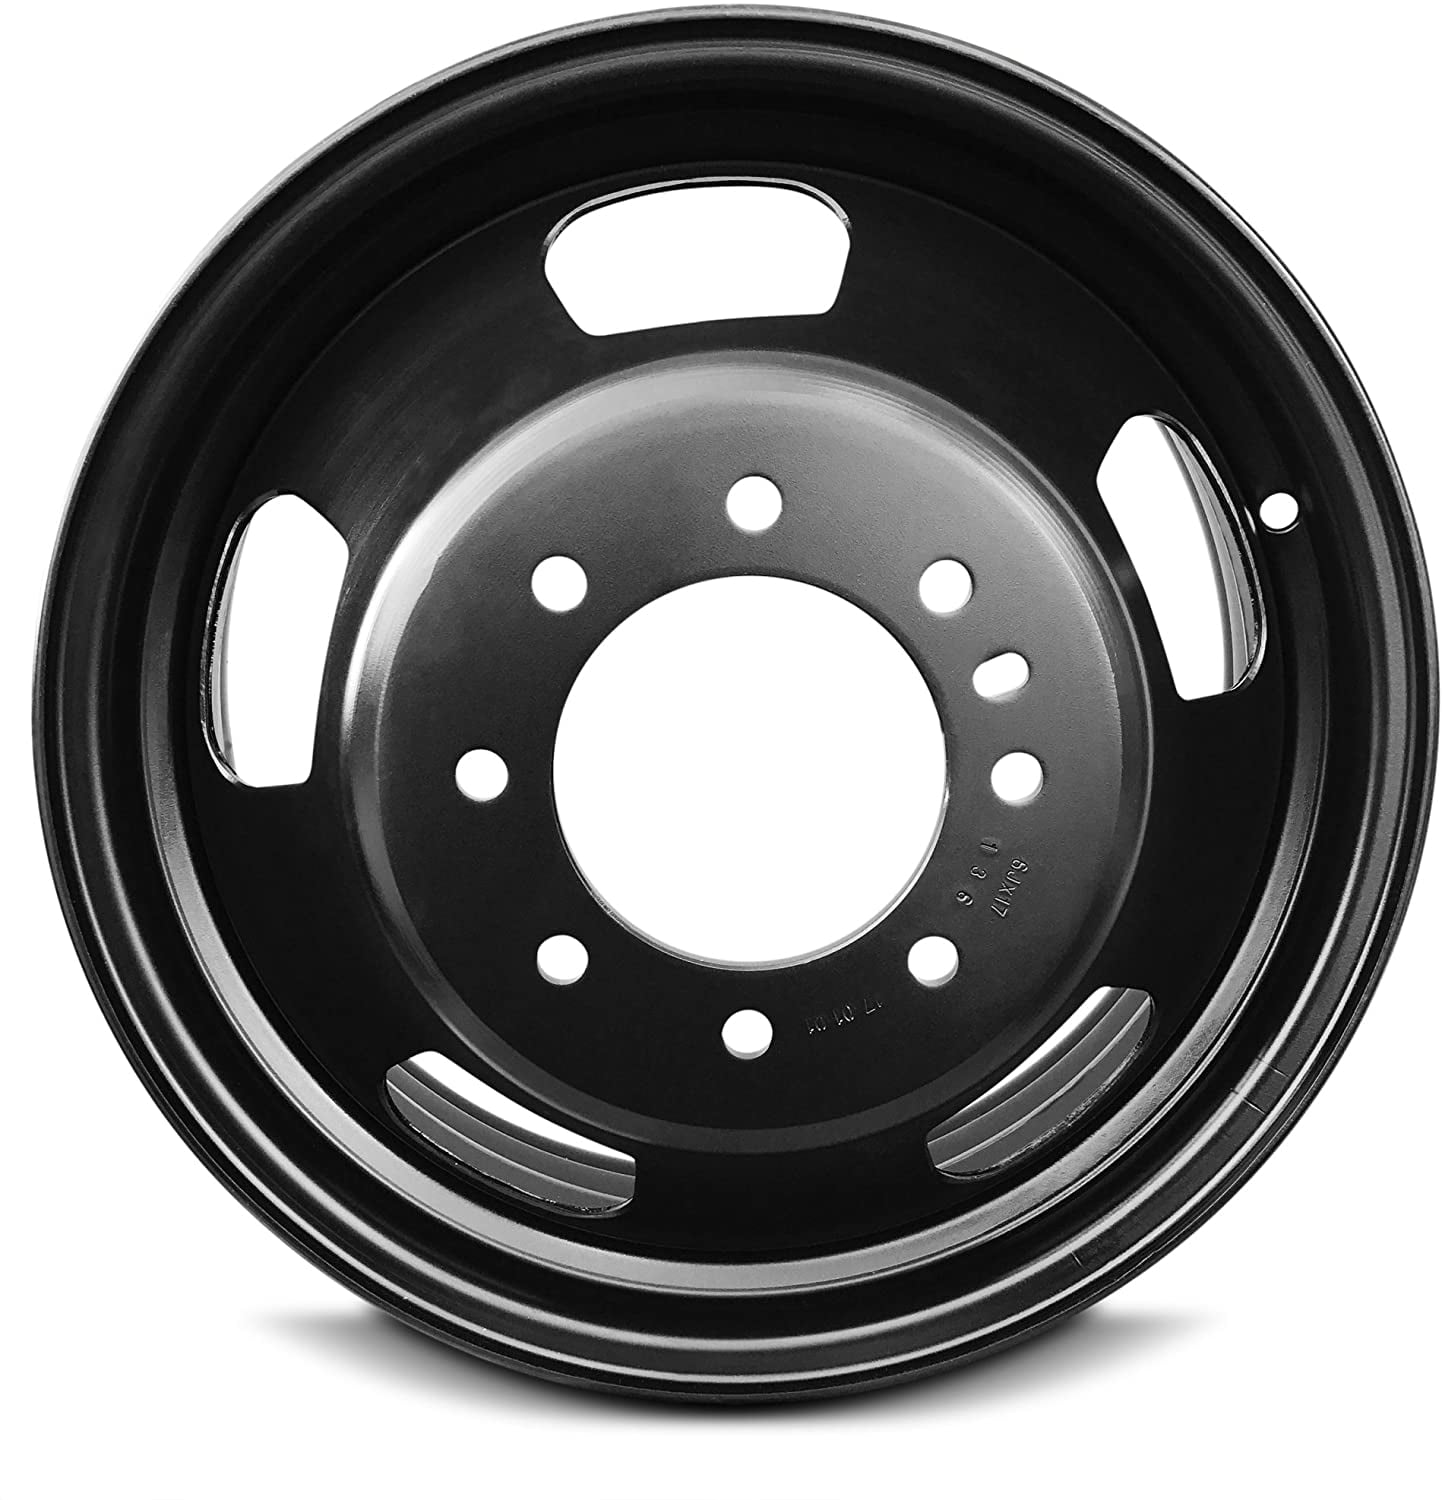 Exact OEM Replacement Road Ready Car Wheel For 2009-2010 Dodge Ram 1500 Pickup 17 Inch 5 Lug Silver Aluminum Rim Fits R17 Tire Full-Size Spare 